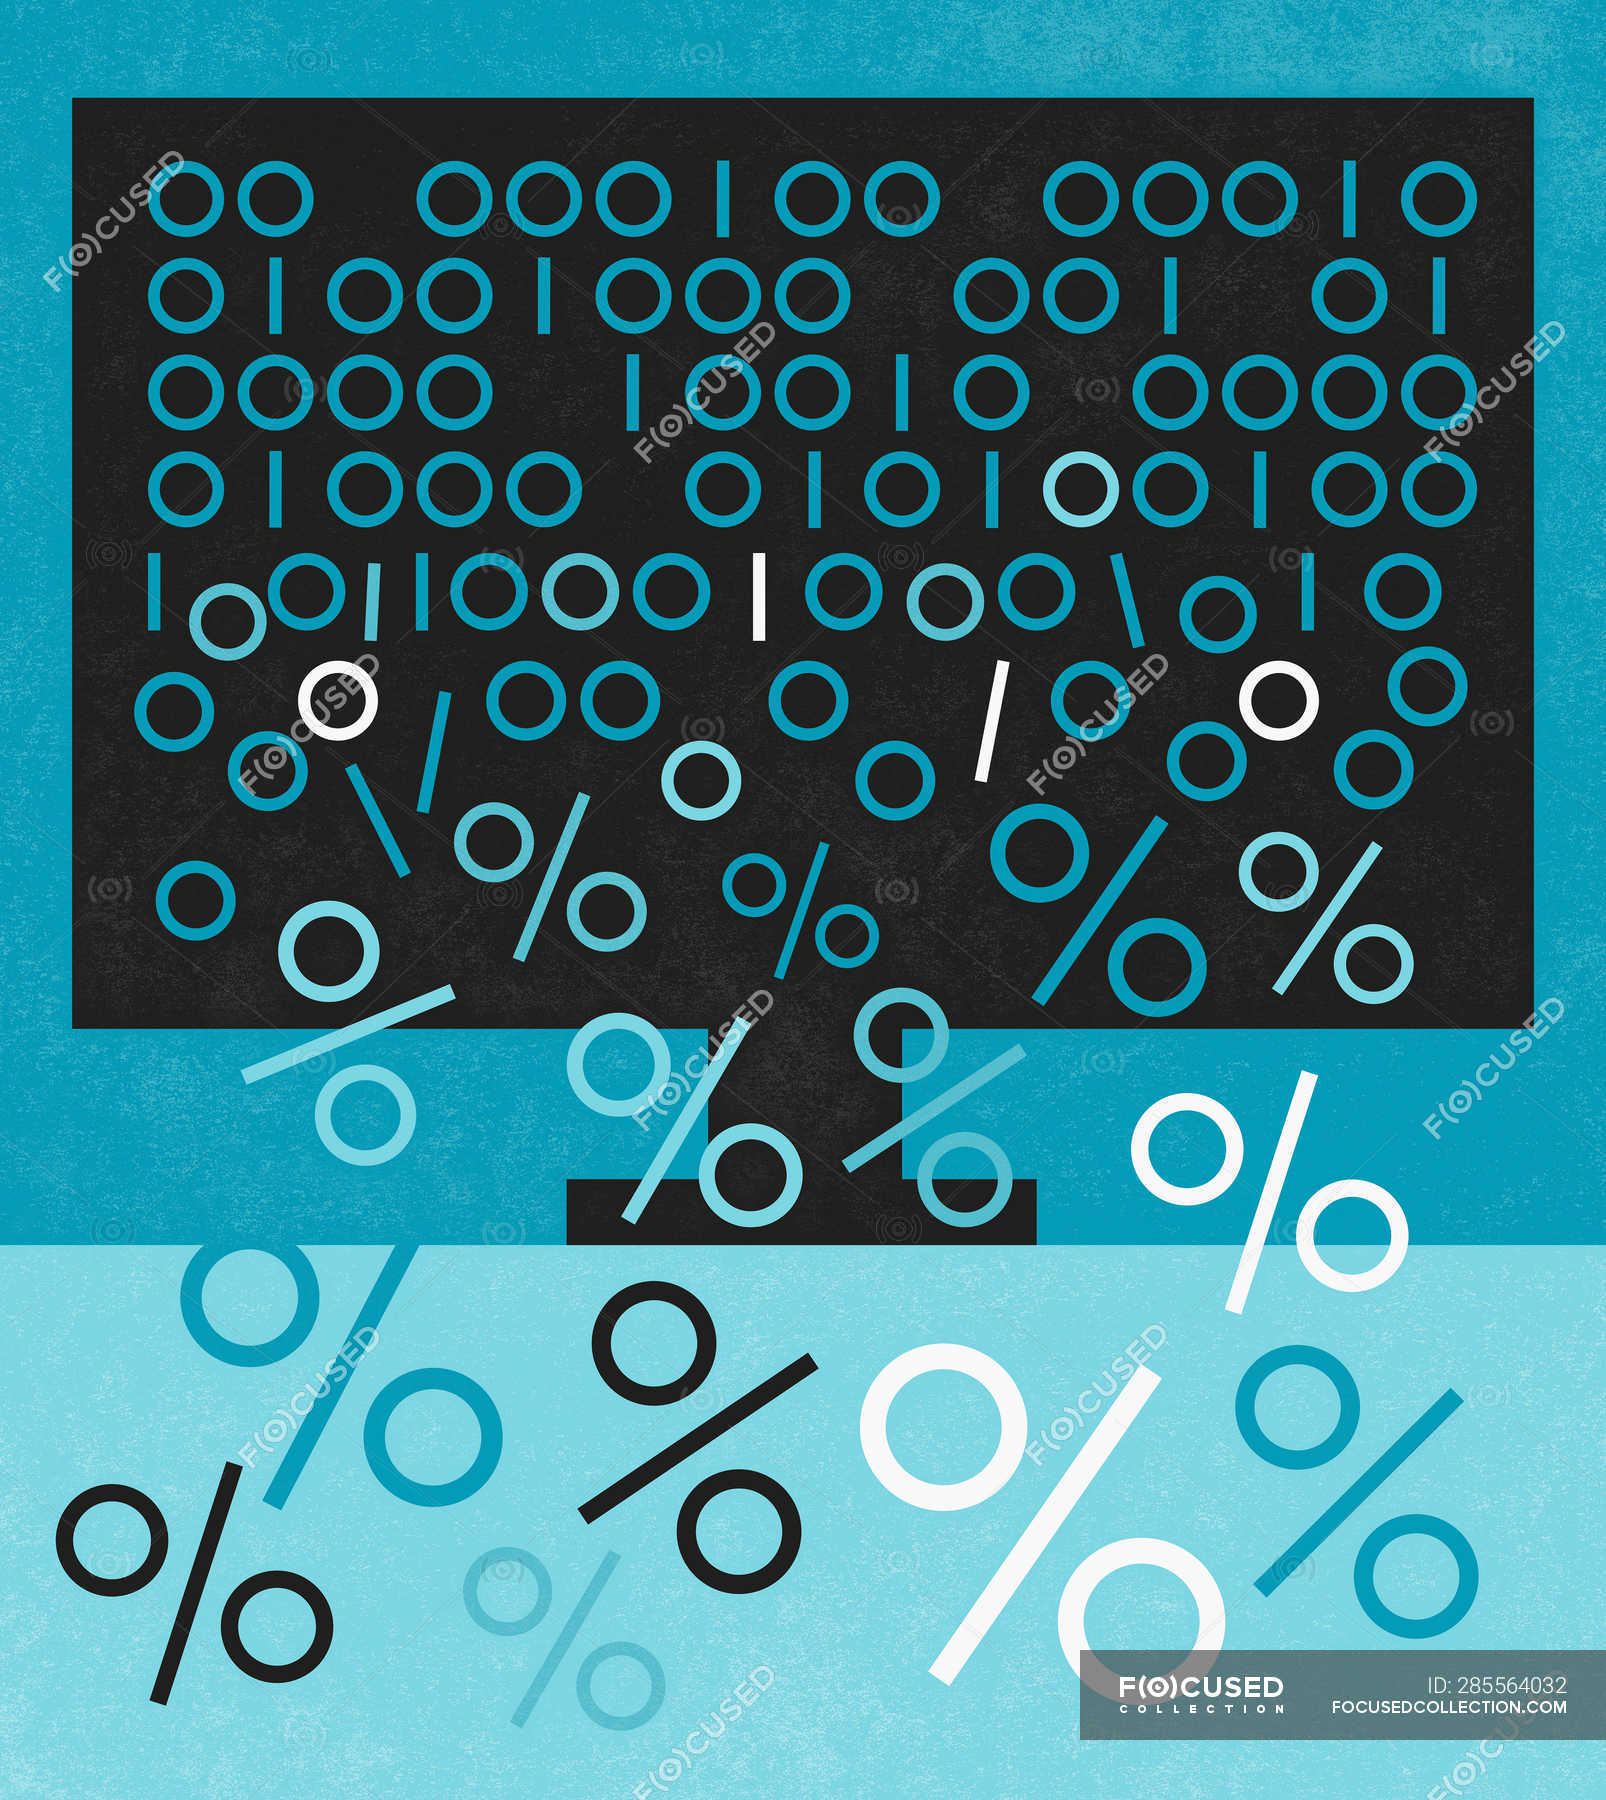 Binary code falling out from computer screen and turning into percentage  signs — blue background, digital - Stock Photo | #285564032